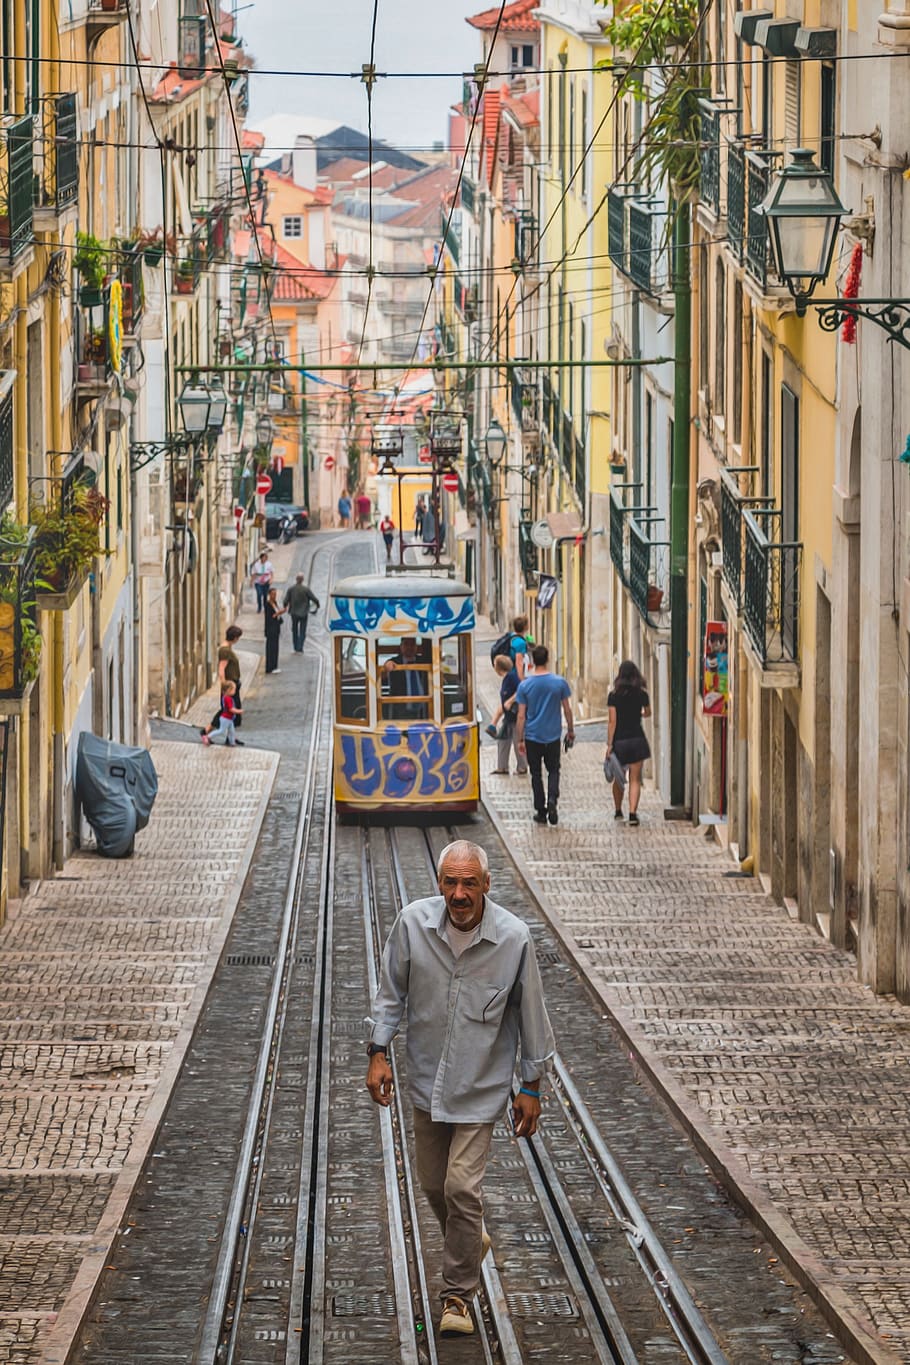 lisbon, tram streetcar, the lisbon tram, people, college, portugal, old town, houses, historical, architecture